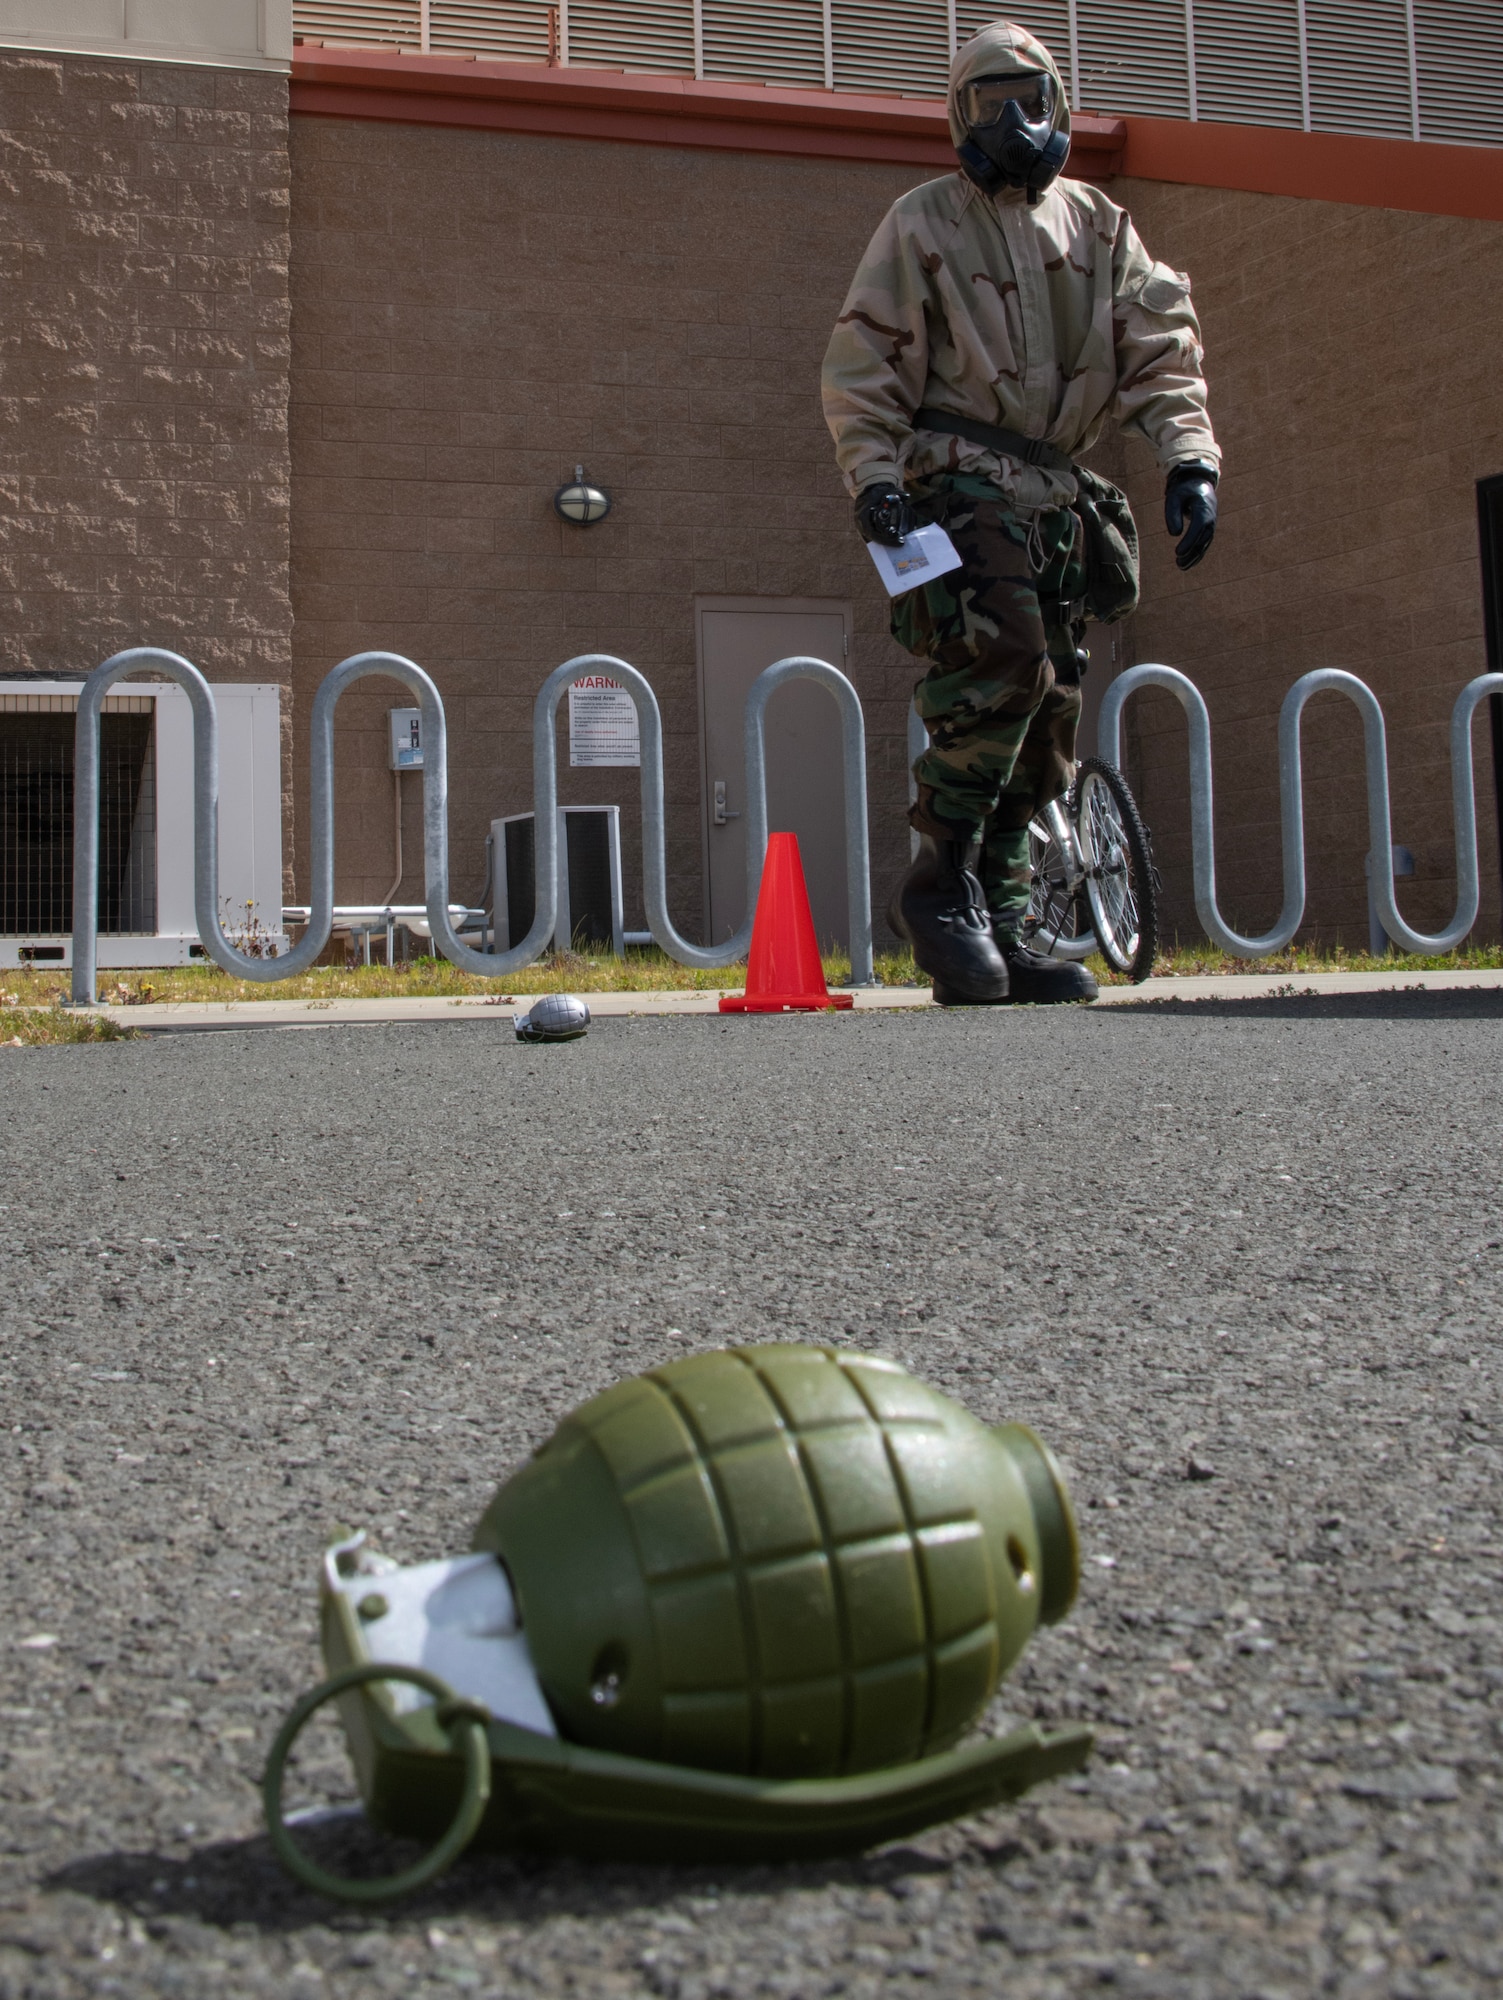 Airman standing by plastic grenade